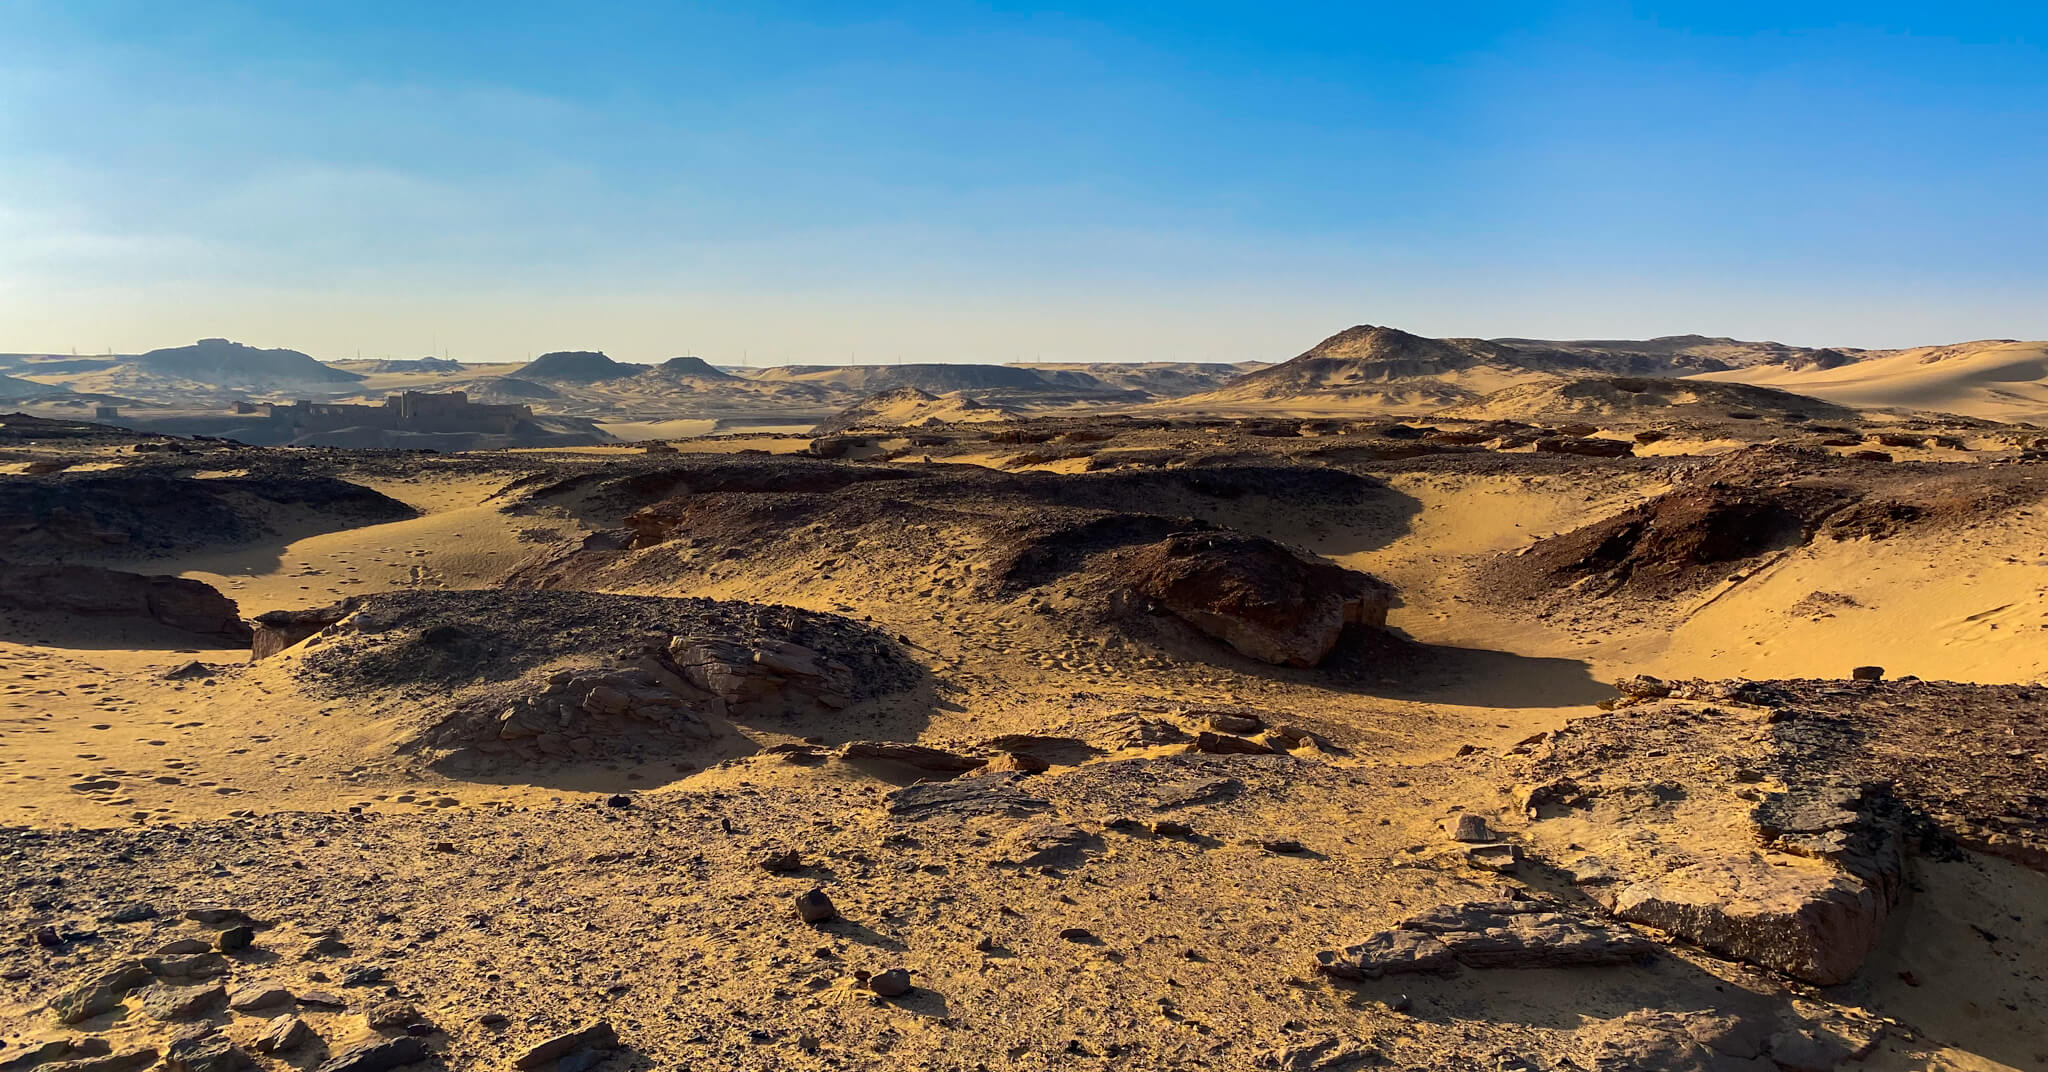 The Sahara desert with the Monastery of St. Simeon in the distance.